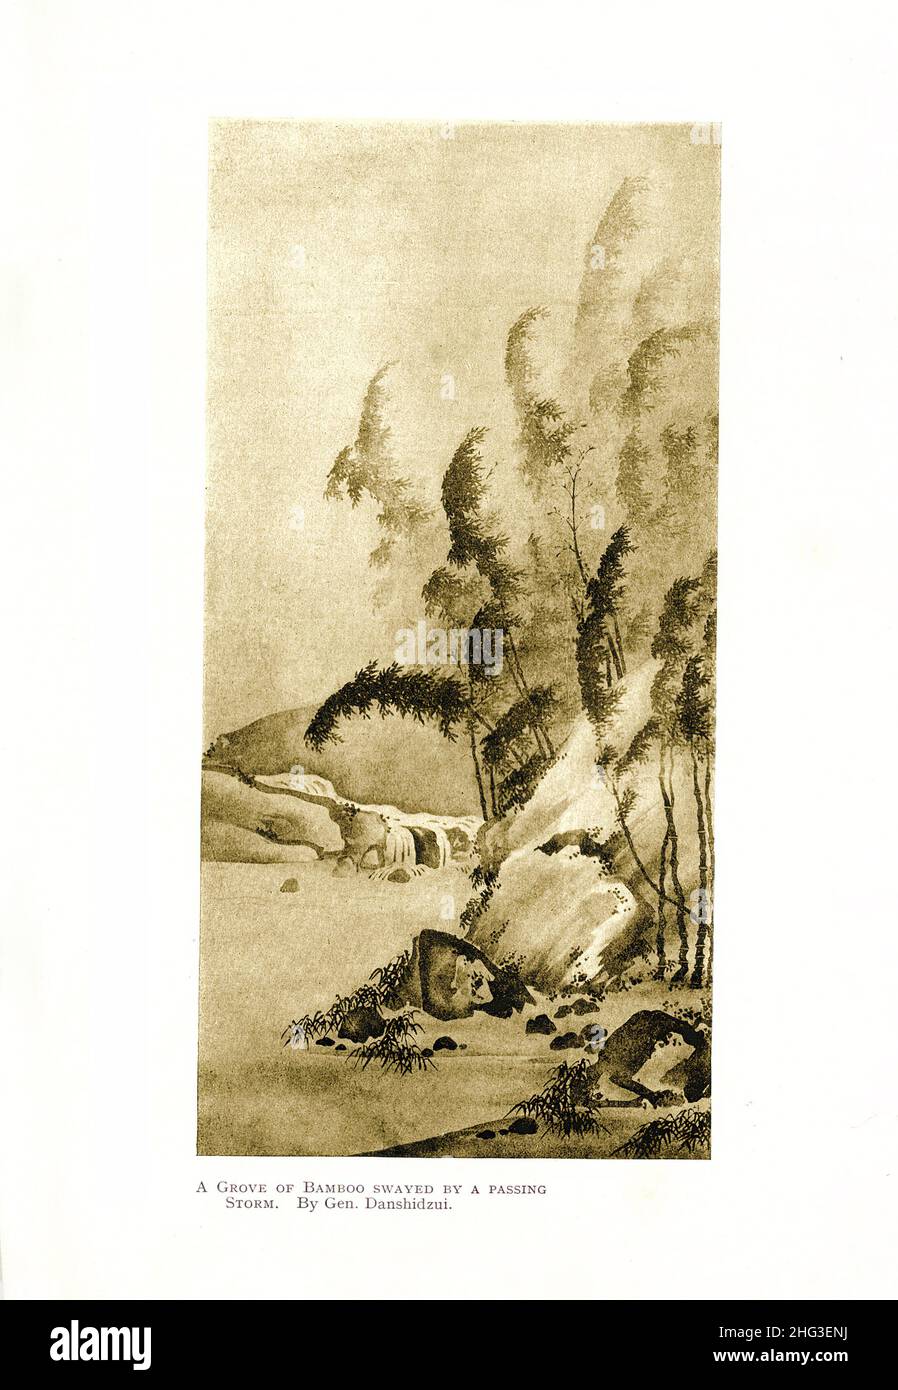 Chinese medieval painting: A Grove Of Bamboo Swayed By A Passing Storm.  By Gen. Danshidzui. Reproduction of book illustration of 1912 Stock Photo